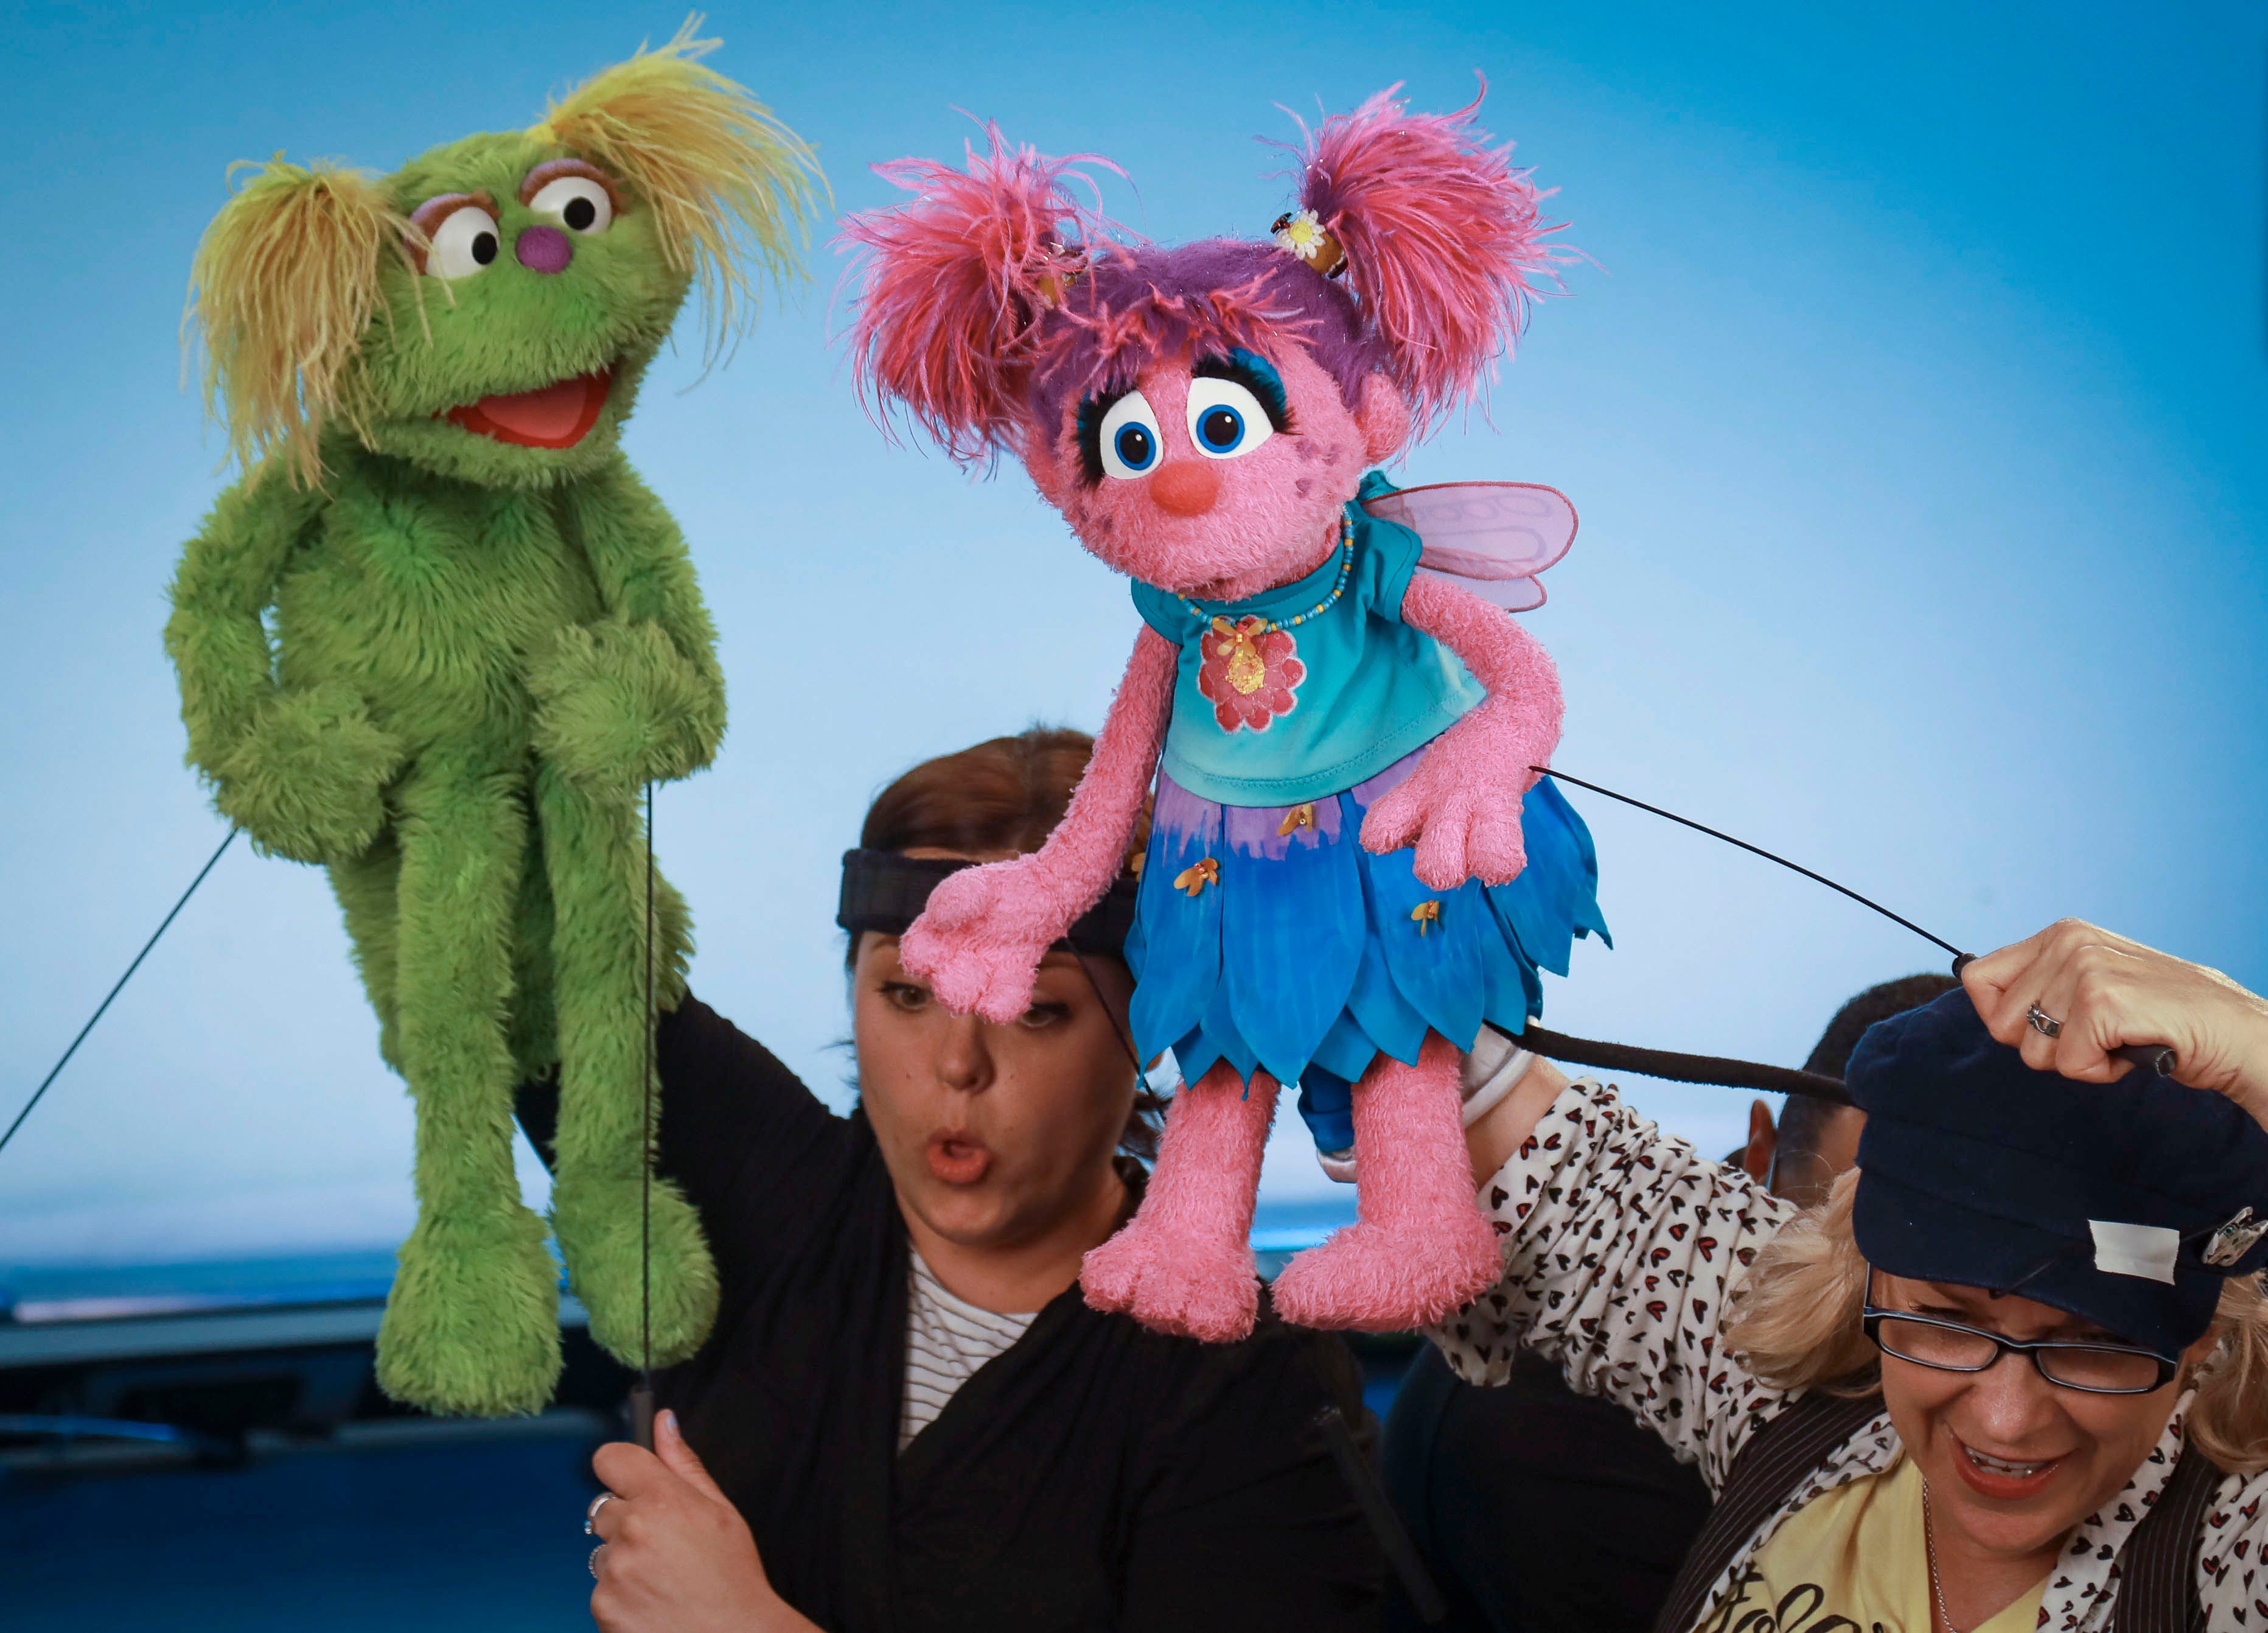 Mandatory Credit: Photo by Bebeto Matthews/AP/Shutterstock (10440203b) This photo shows puppeteers Haley Jenkins, left, and Leslie Carrara-Rudolph performing with their "Sesame Street" muppets Karli and Abby Cadabby, respectively, for segments about parental addiction in New York. Sesame Workshop is addressing the issue of addiction. Data shows 5.7 million children under 11 live in households with a parent with substance use disorder TV-Sesame Street-Addiction, New York, USA - 06 Aug 2019